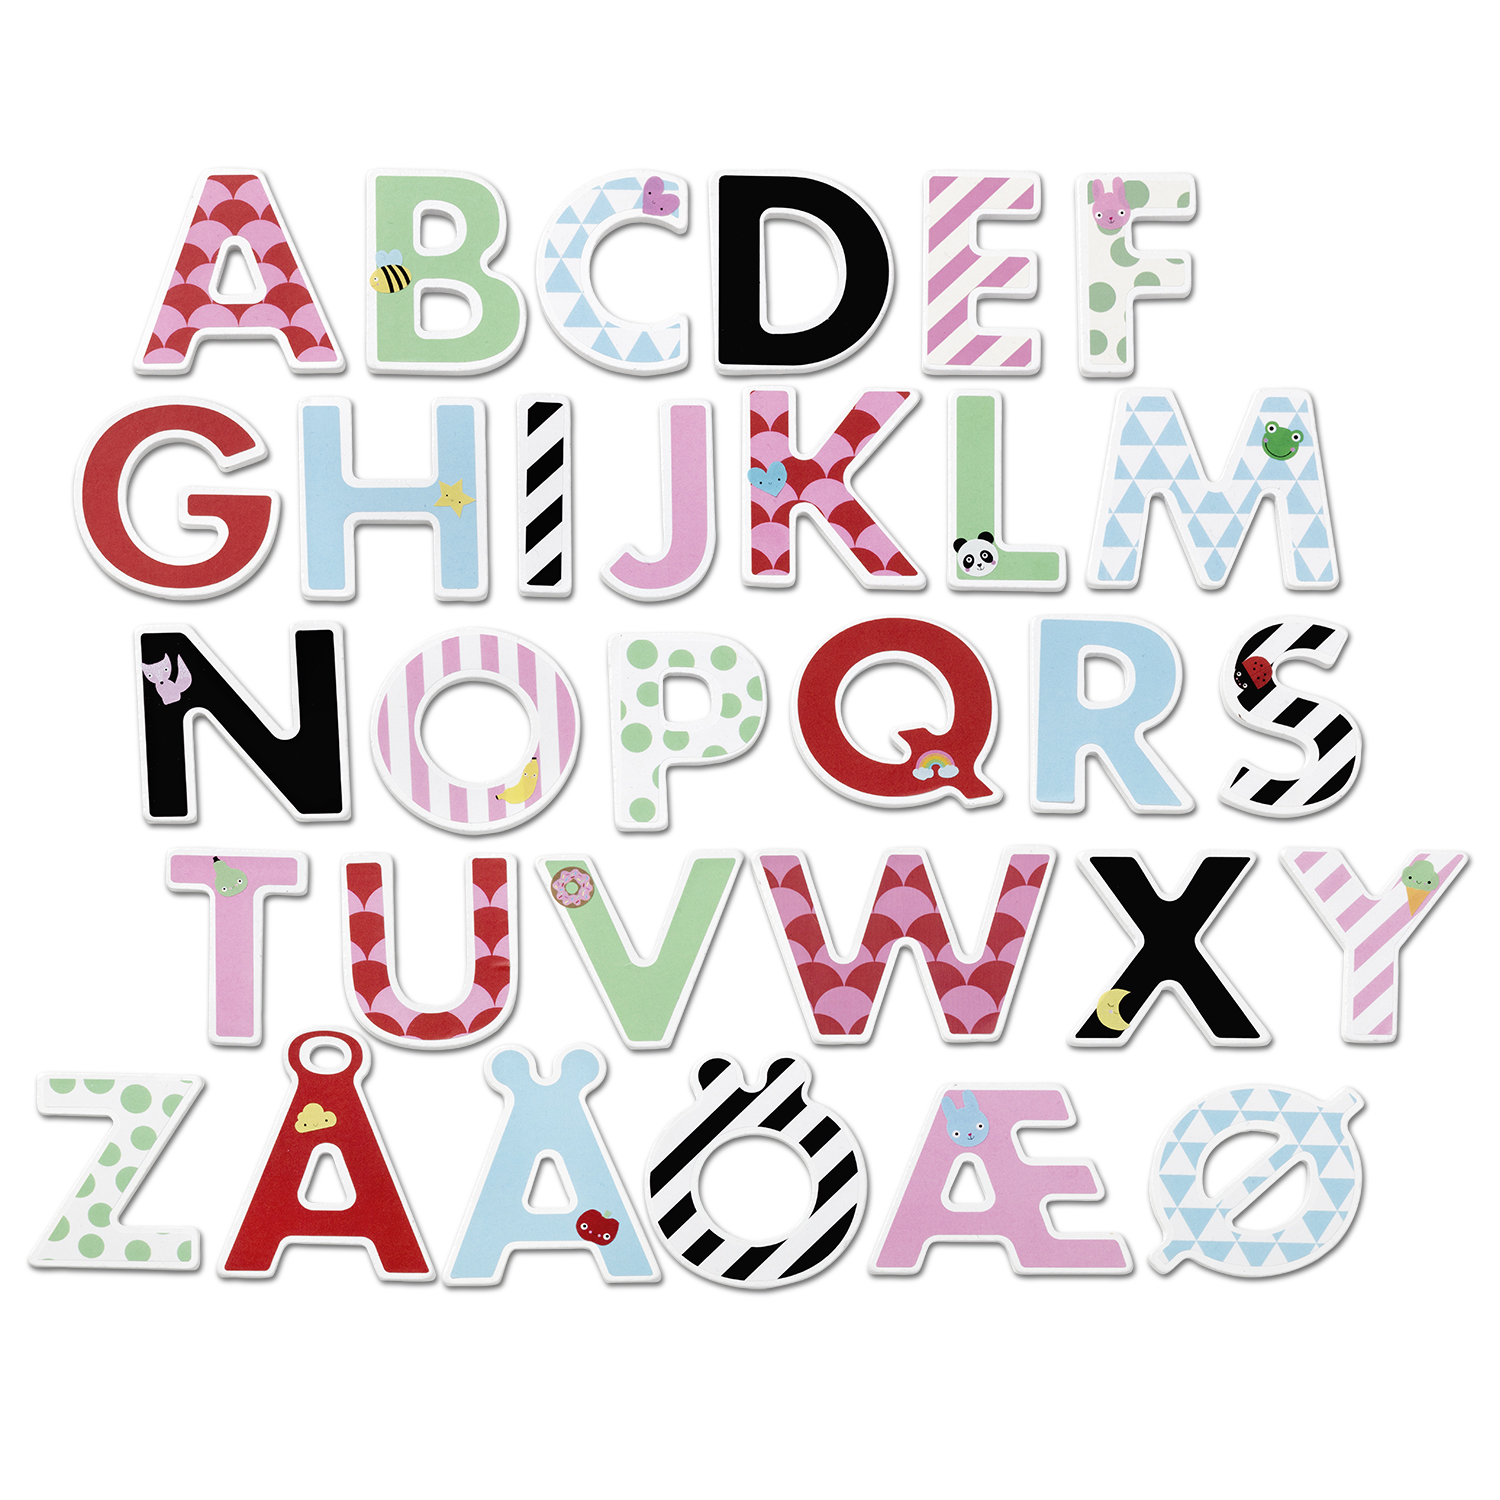 Arts and Craft micki ä - decorative letter & mix and match stickers